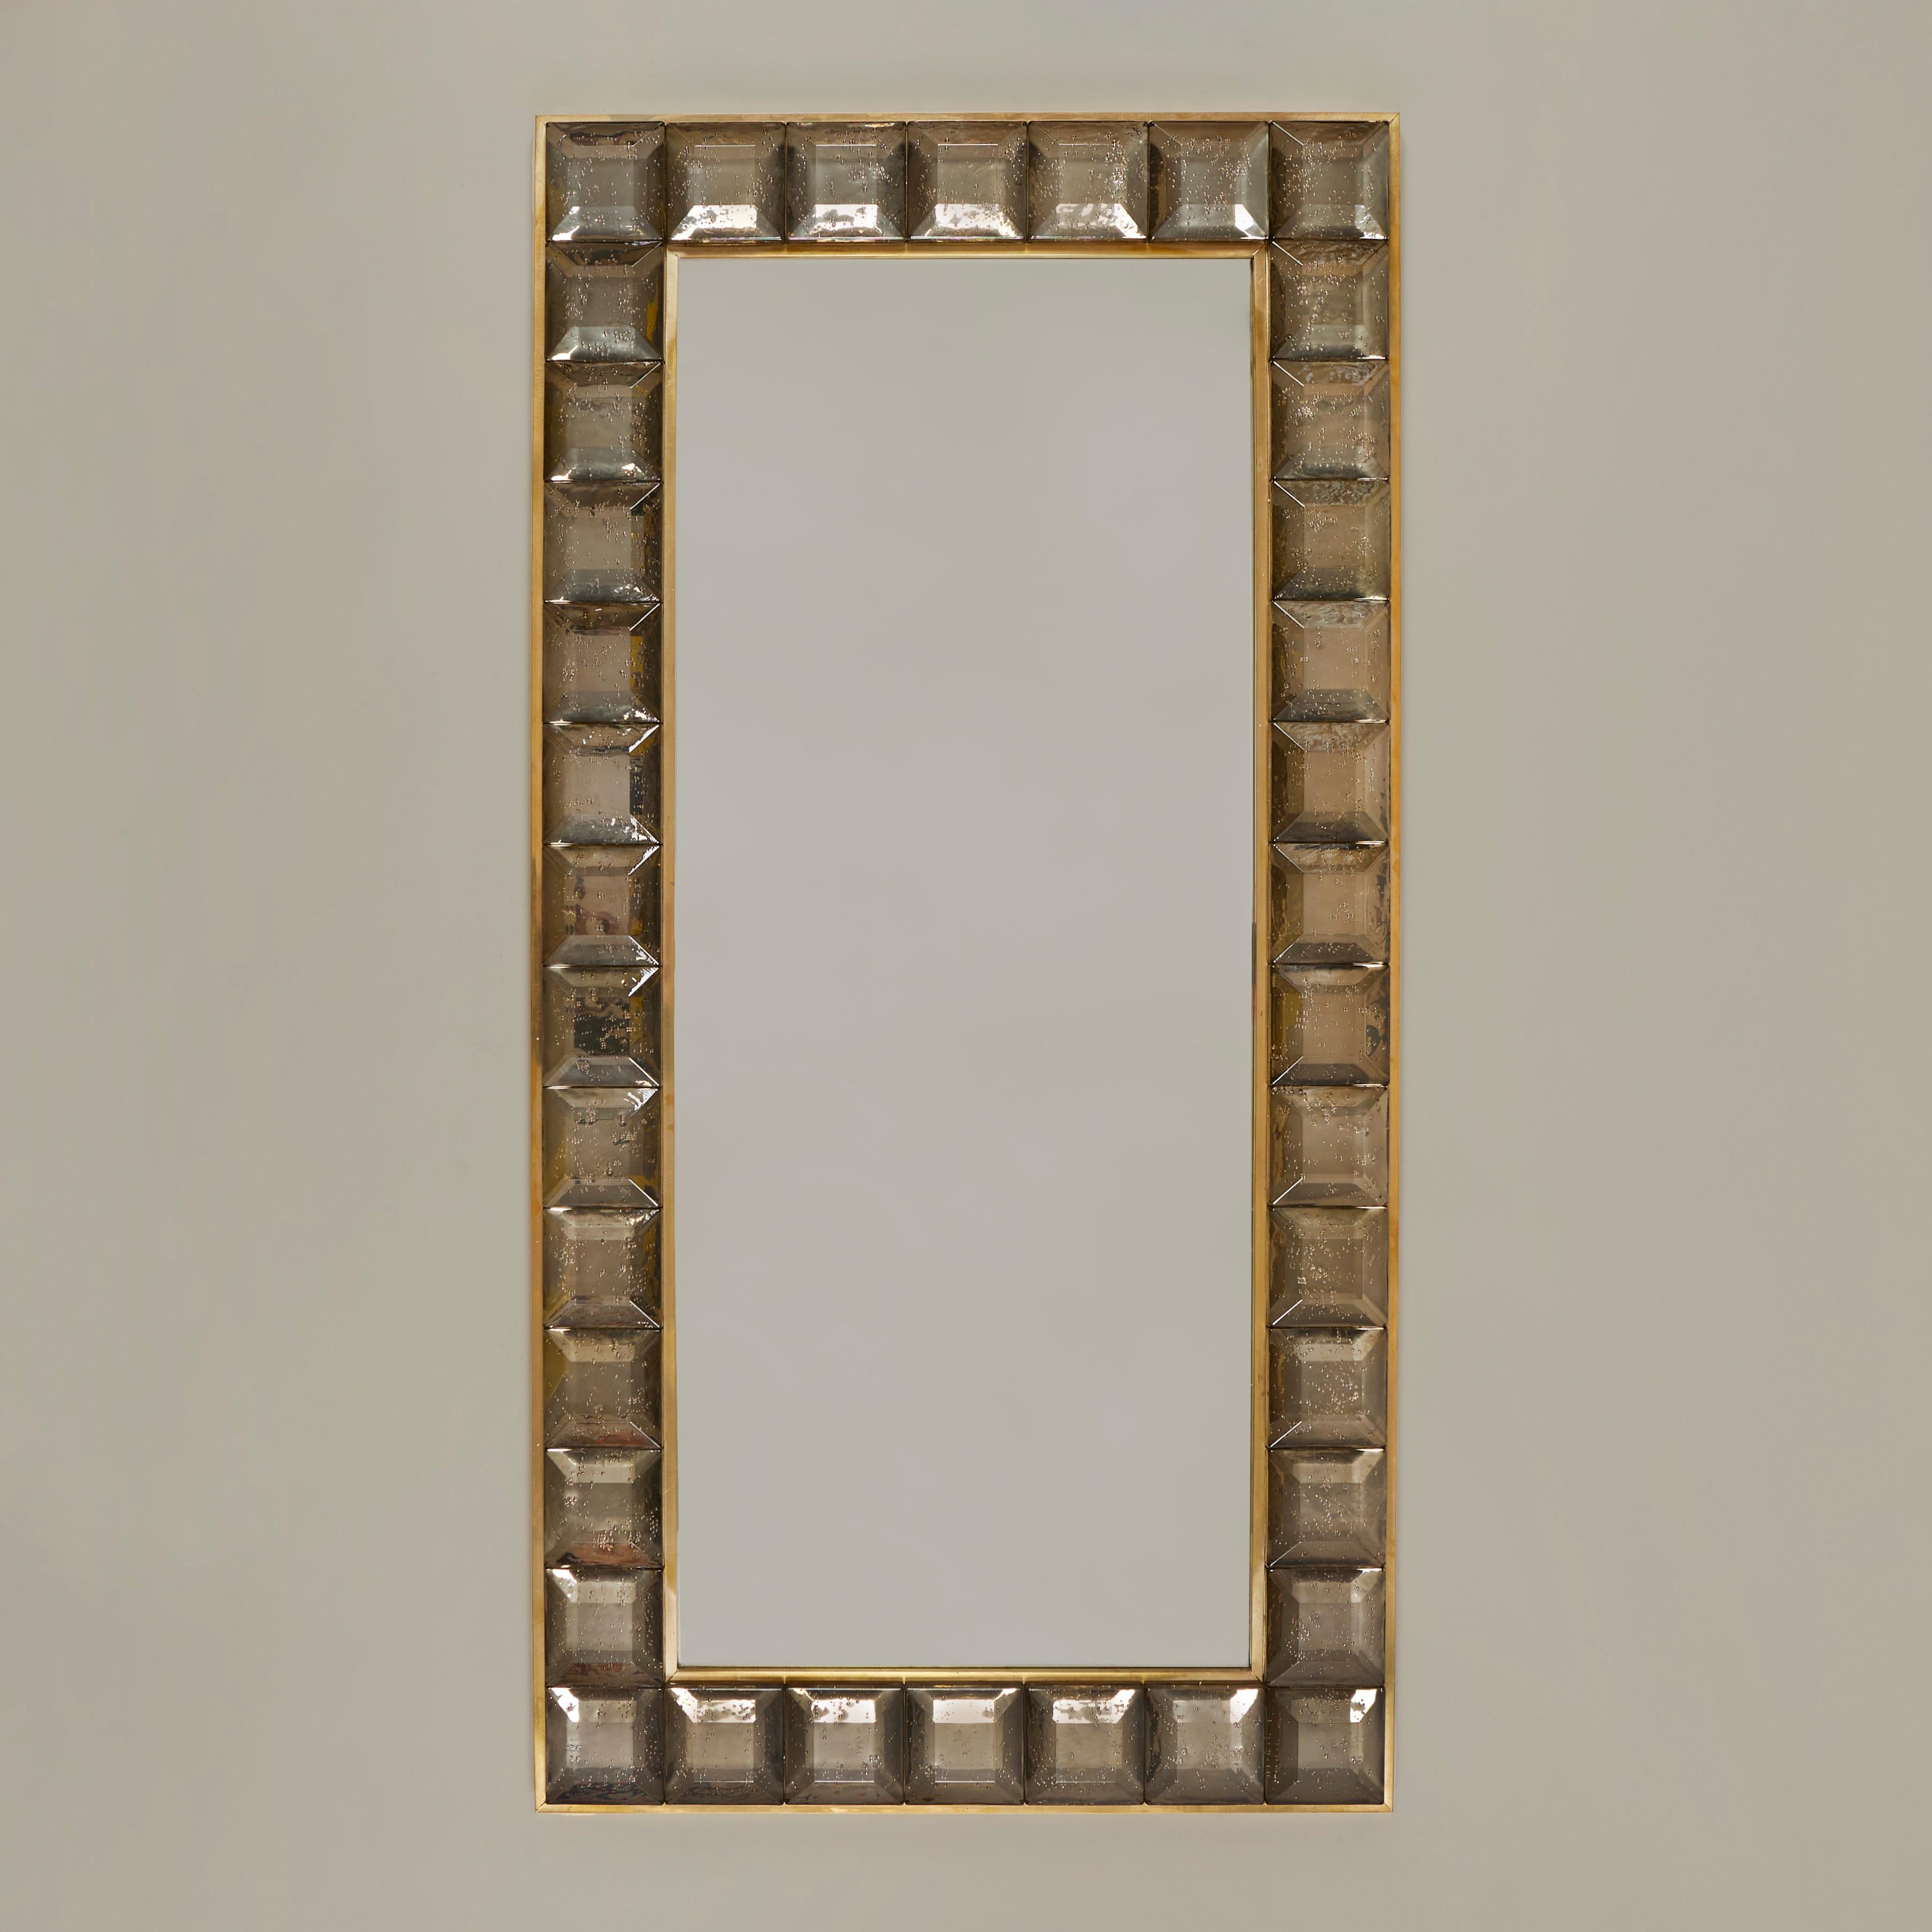 Stunning contemporary Italian rectangular mirror surrounded with 38 faceted Murano glass 'jewels' in a soft brown fume shade. The design incorporates a chic brass decorative edge to both the mirror and outer frame of the glass. The overall effect is